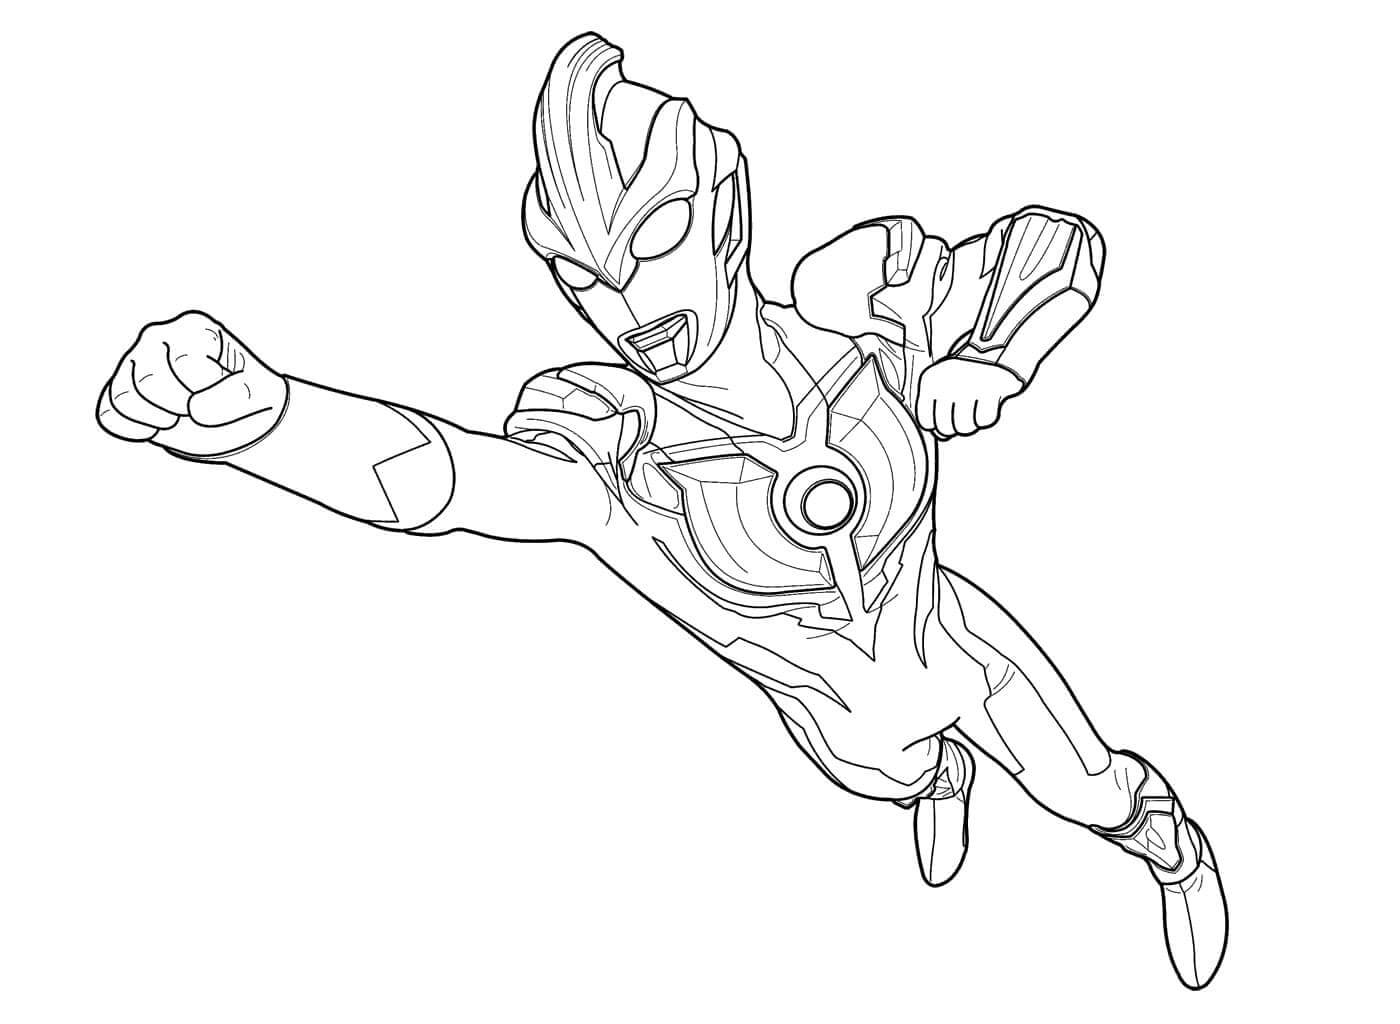 Ultraman Flying Coloring Page